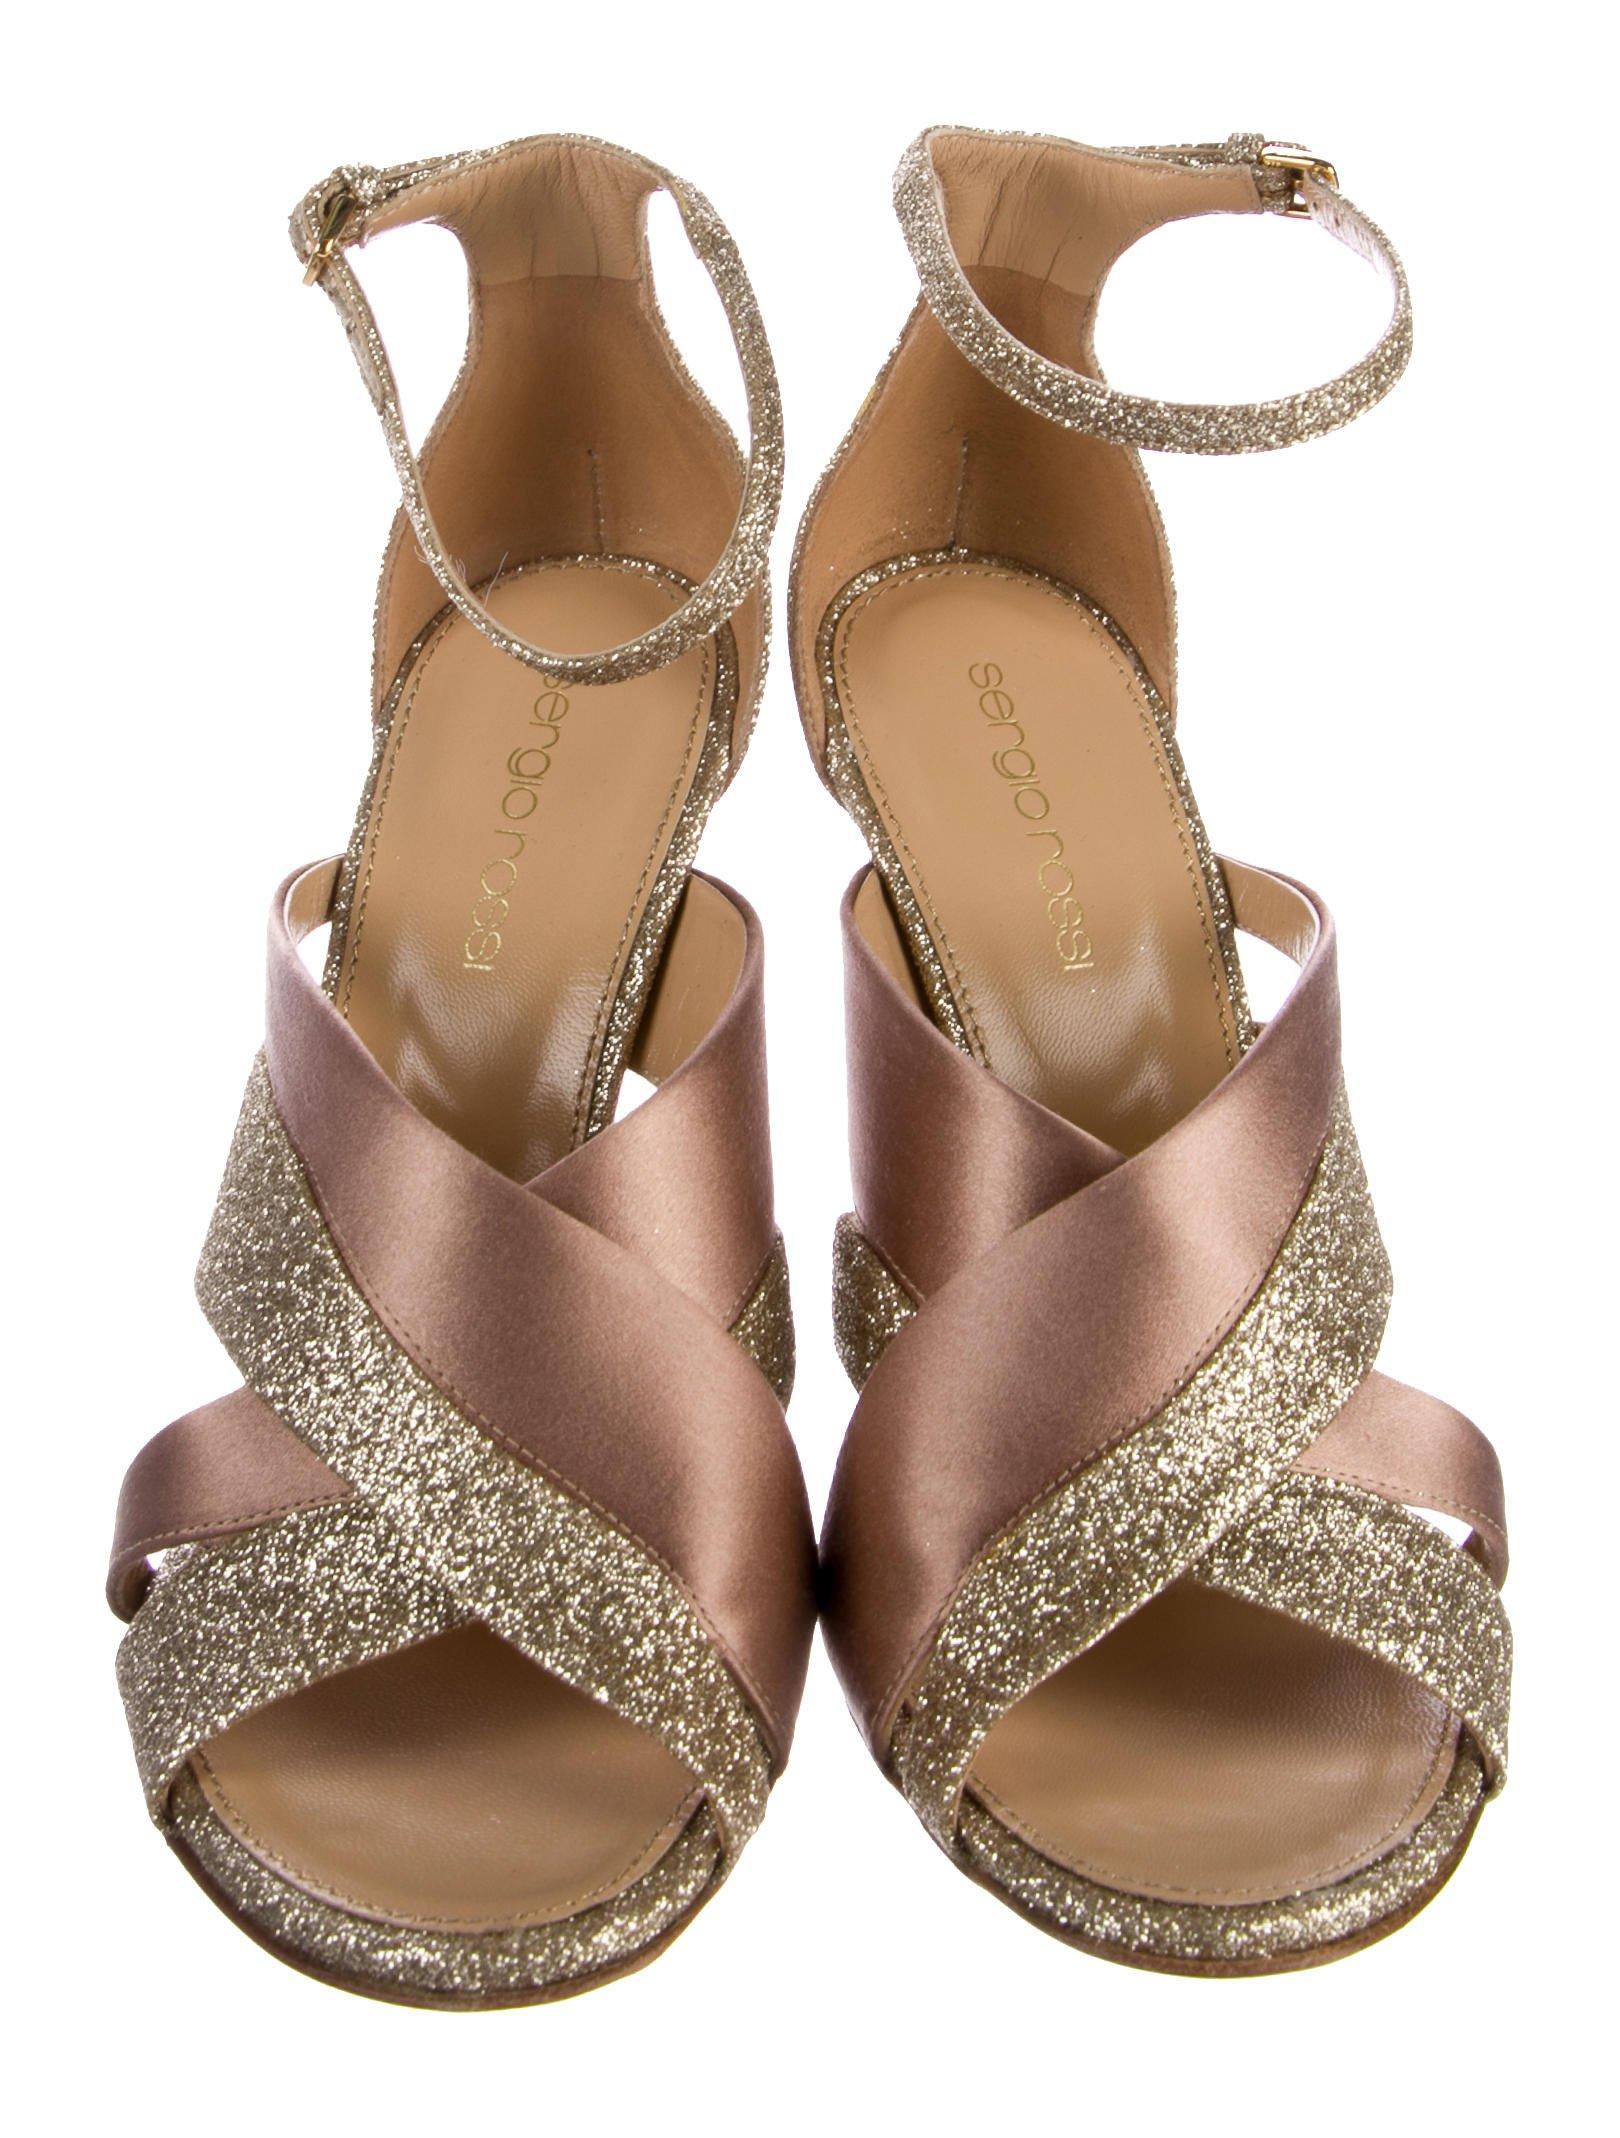 Sergio Rossi NEW Gold Taupe Satin Evening Sandals Heels in Box

Size IT 36.5
Satin
Glitter 
Ankle buckle closure
Made in Italy 
Heel height 4.25